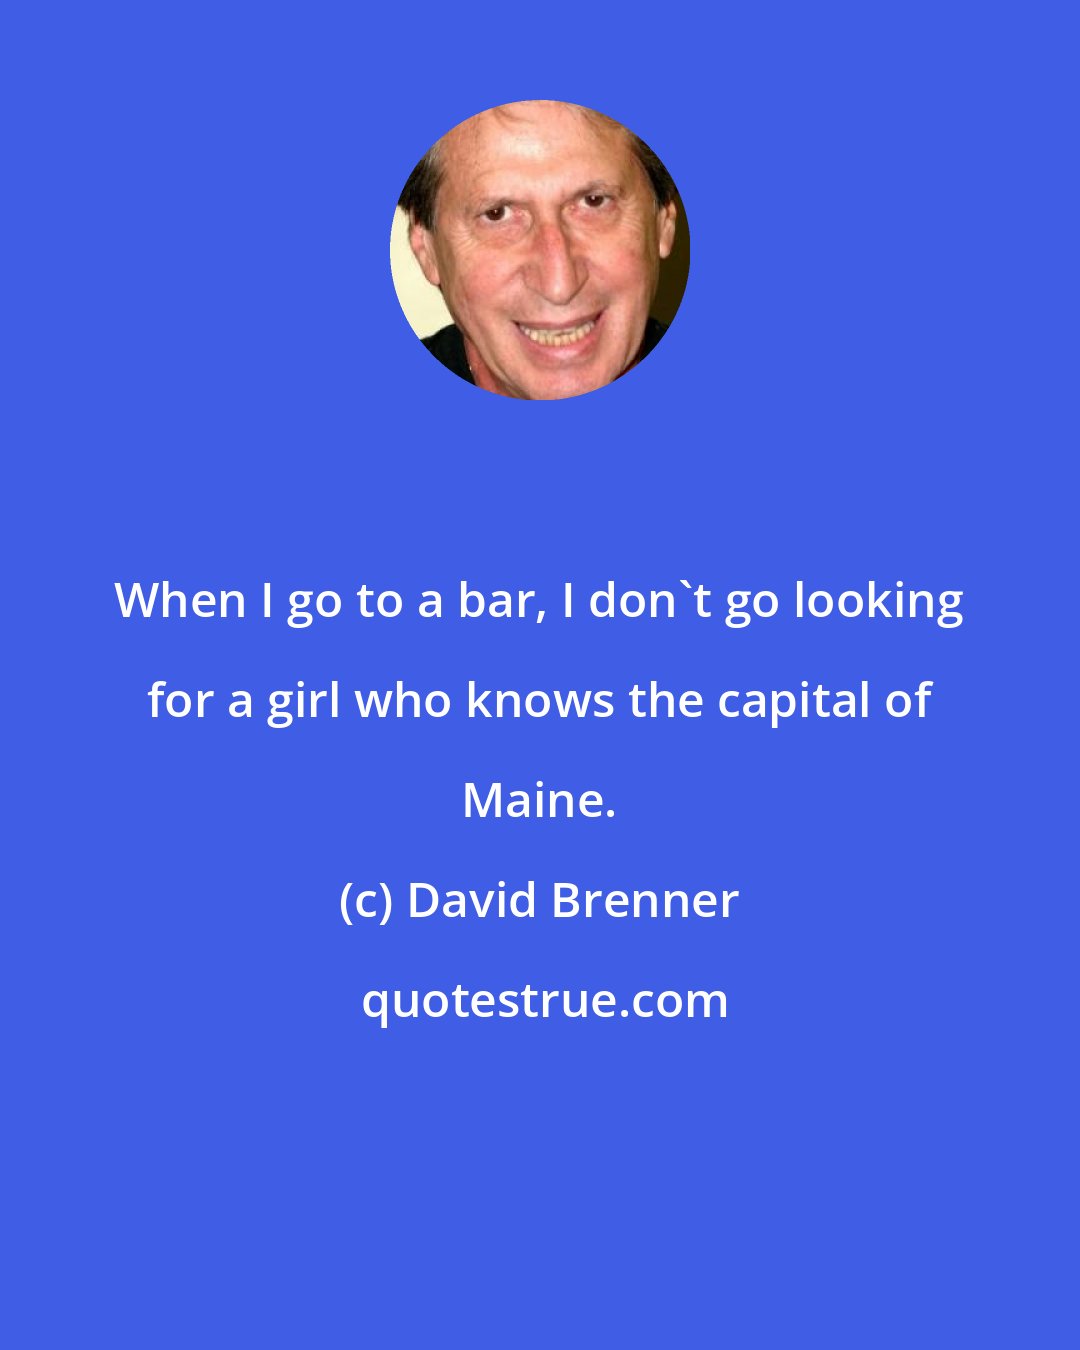 David Brenner: When I go to a bar, I don't go looking for a girl who knows the capital of Maine.